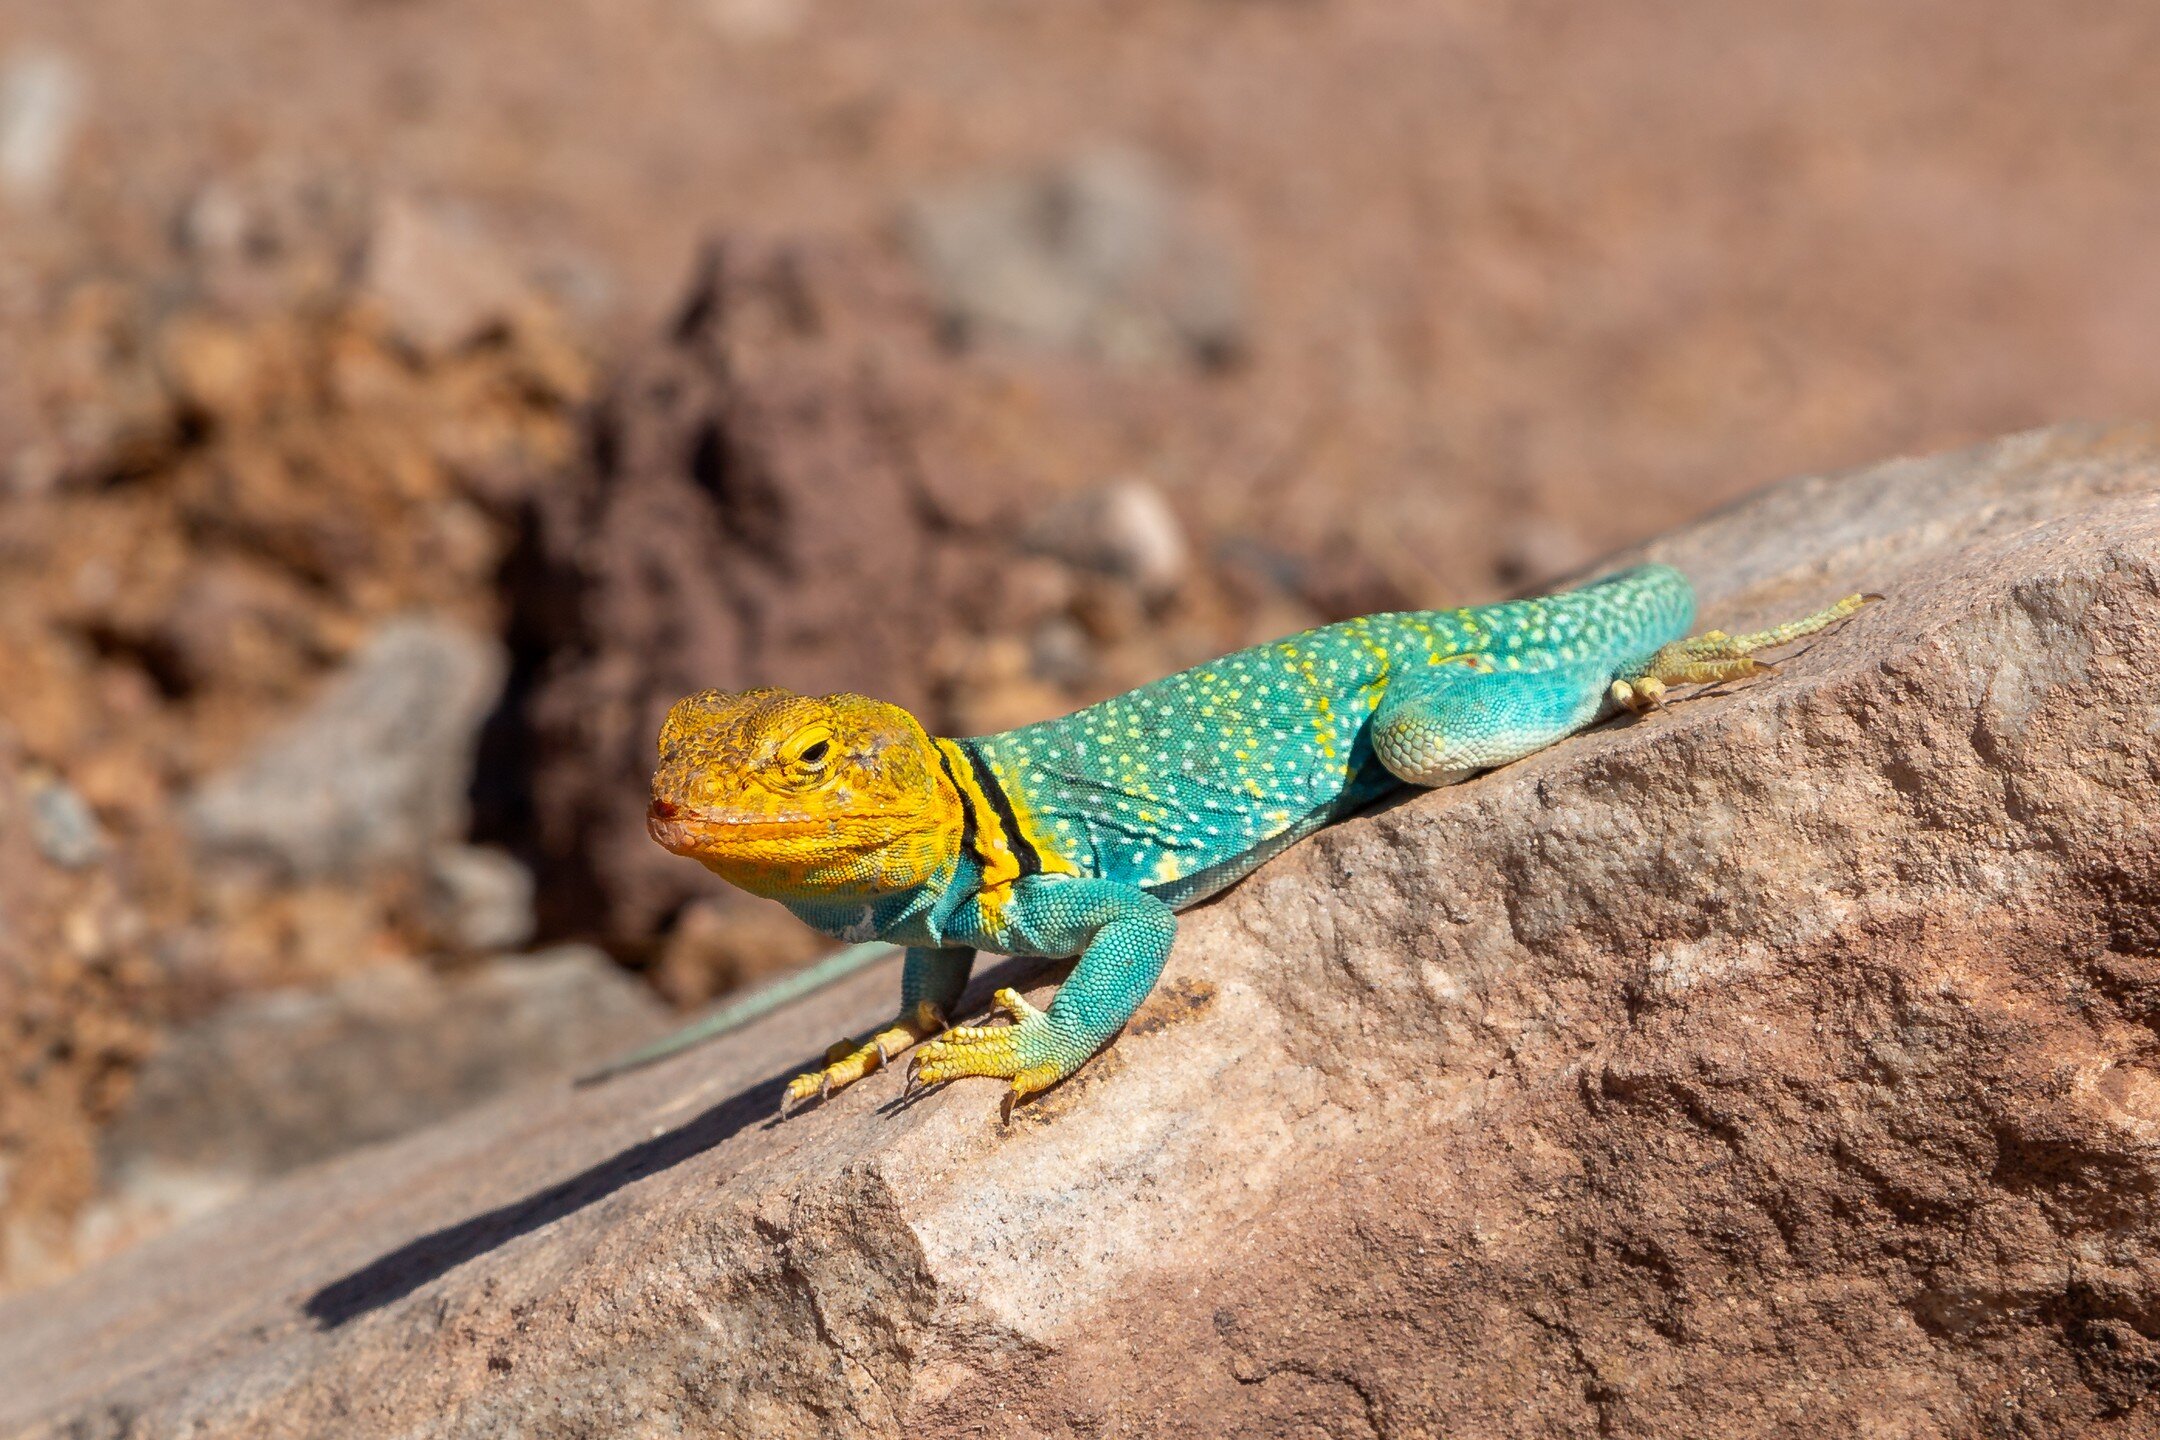 Collared Lizards are excellent runners, at top speed they raise themselves up on only their muscular back legs. Look carefully at this one and you can see they definitely don't skip leg day.